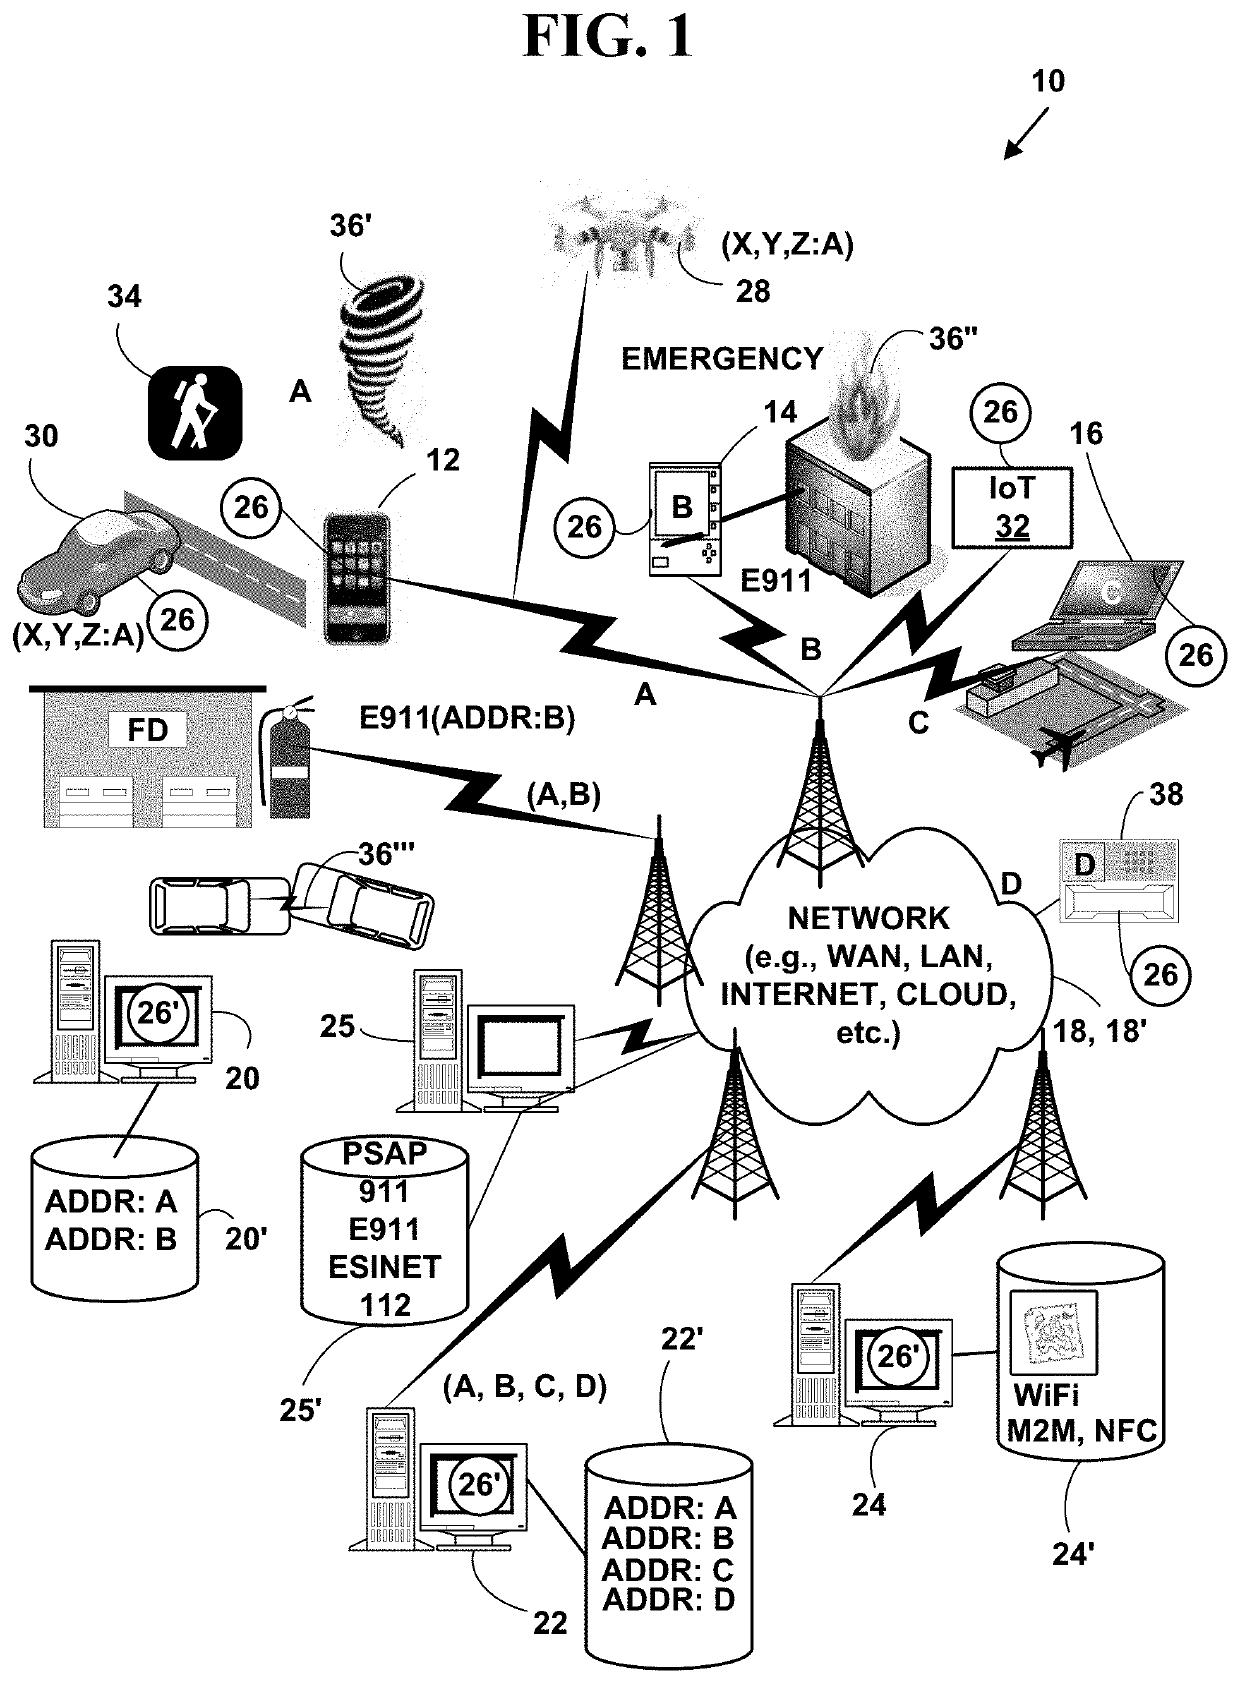 Method and system for locating a network device connected to a proxy network device in an emergency situation